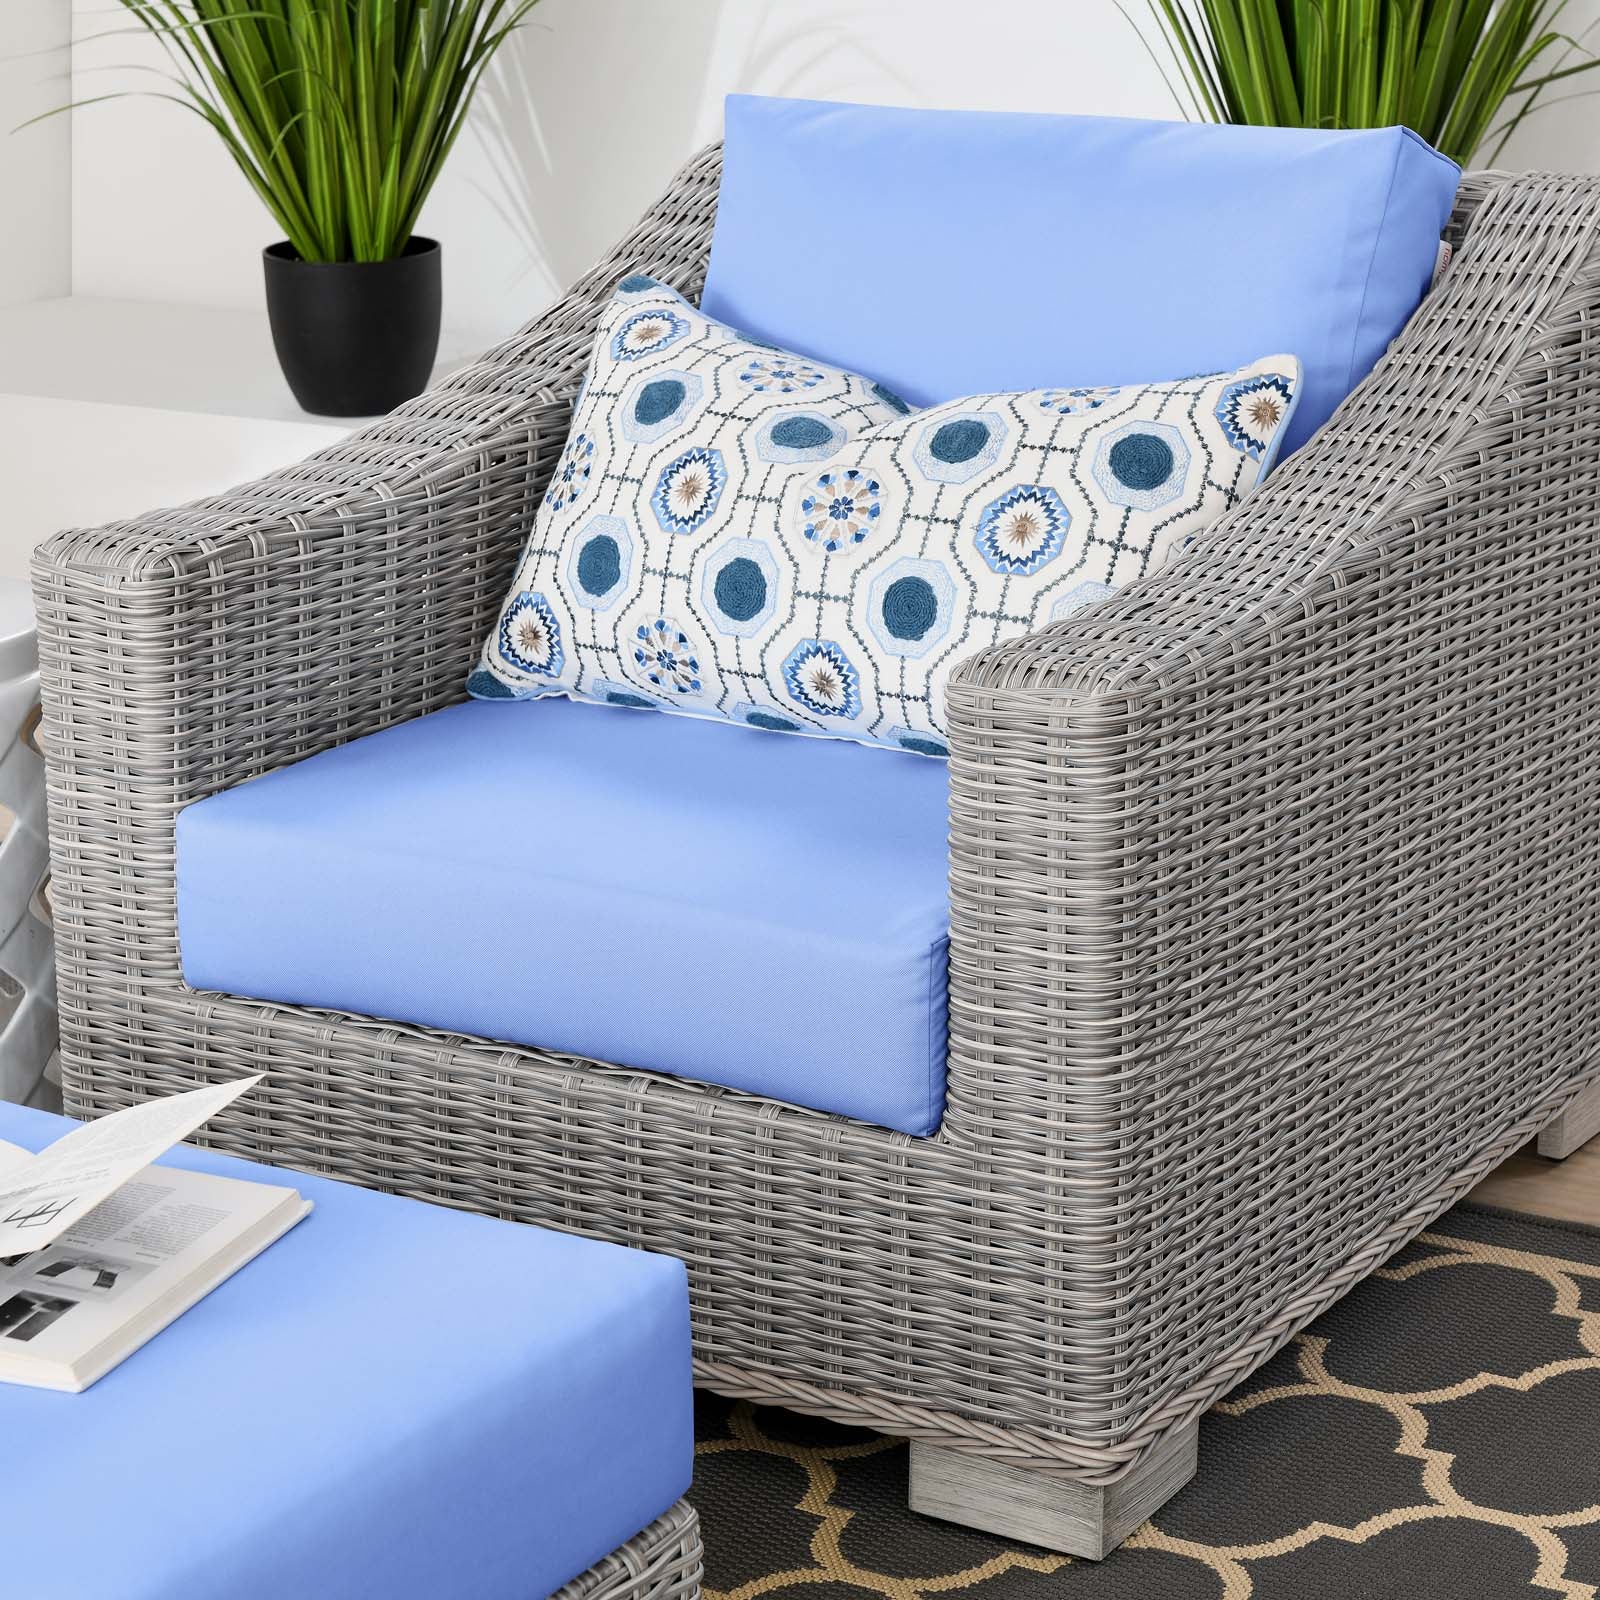 Conway Outdoor Patio Wicker Rattan 2-Piece Armchair and Ottoman Set